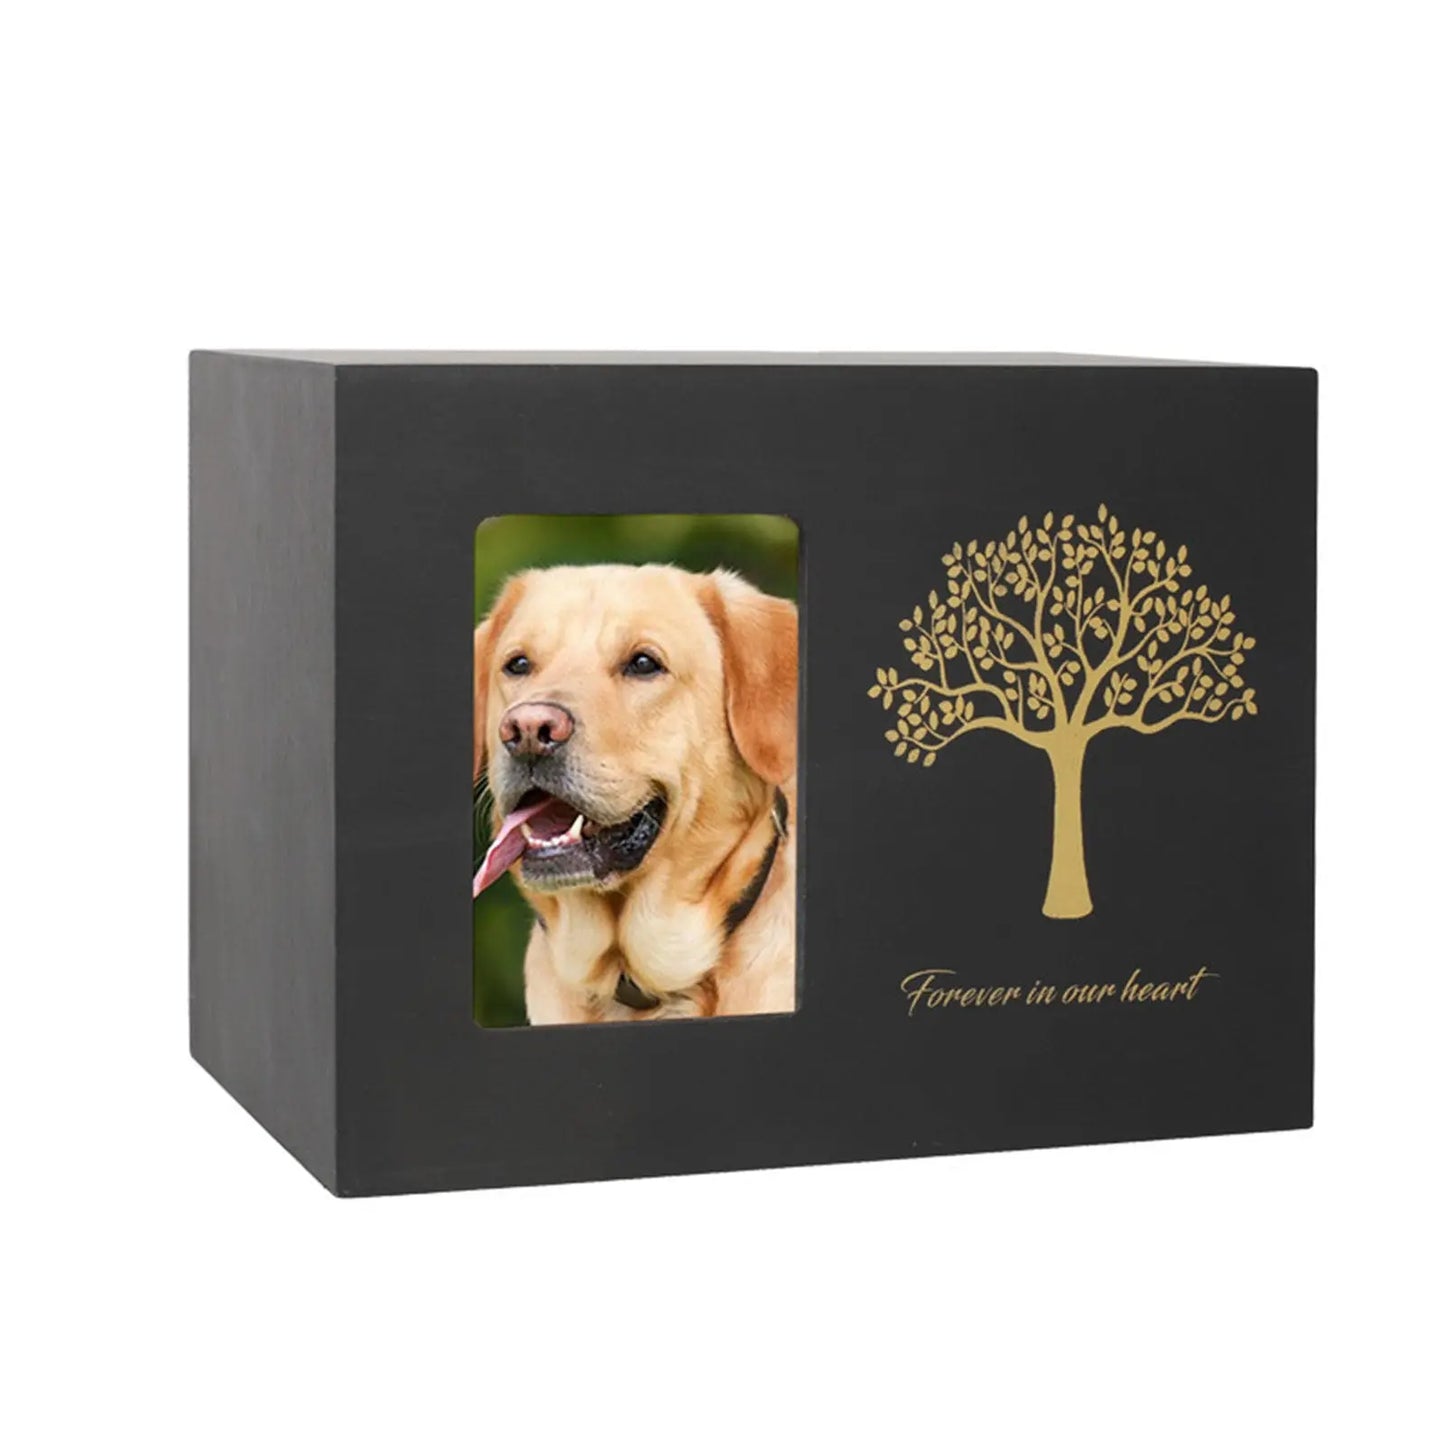 Leven Pet Ashes Urn-Pet Urn for Ashes-Cremation Urns- The cremation urns for ashes and keepsakes for ashes come in a variety of styles to suit most tastes, decor and different volumes of funeral ashes.